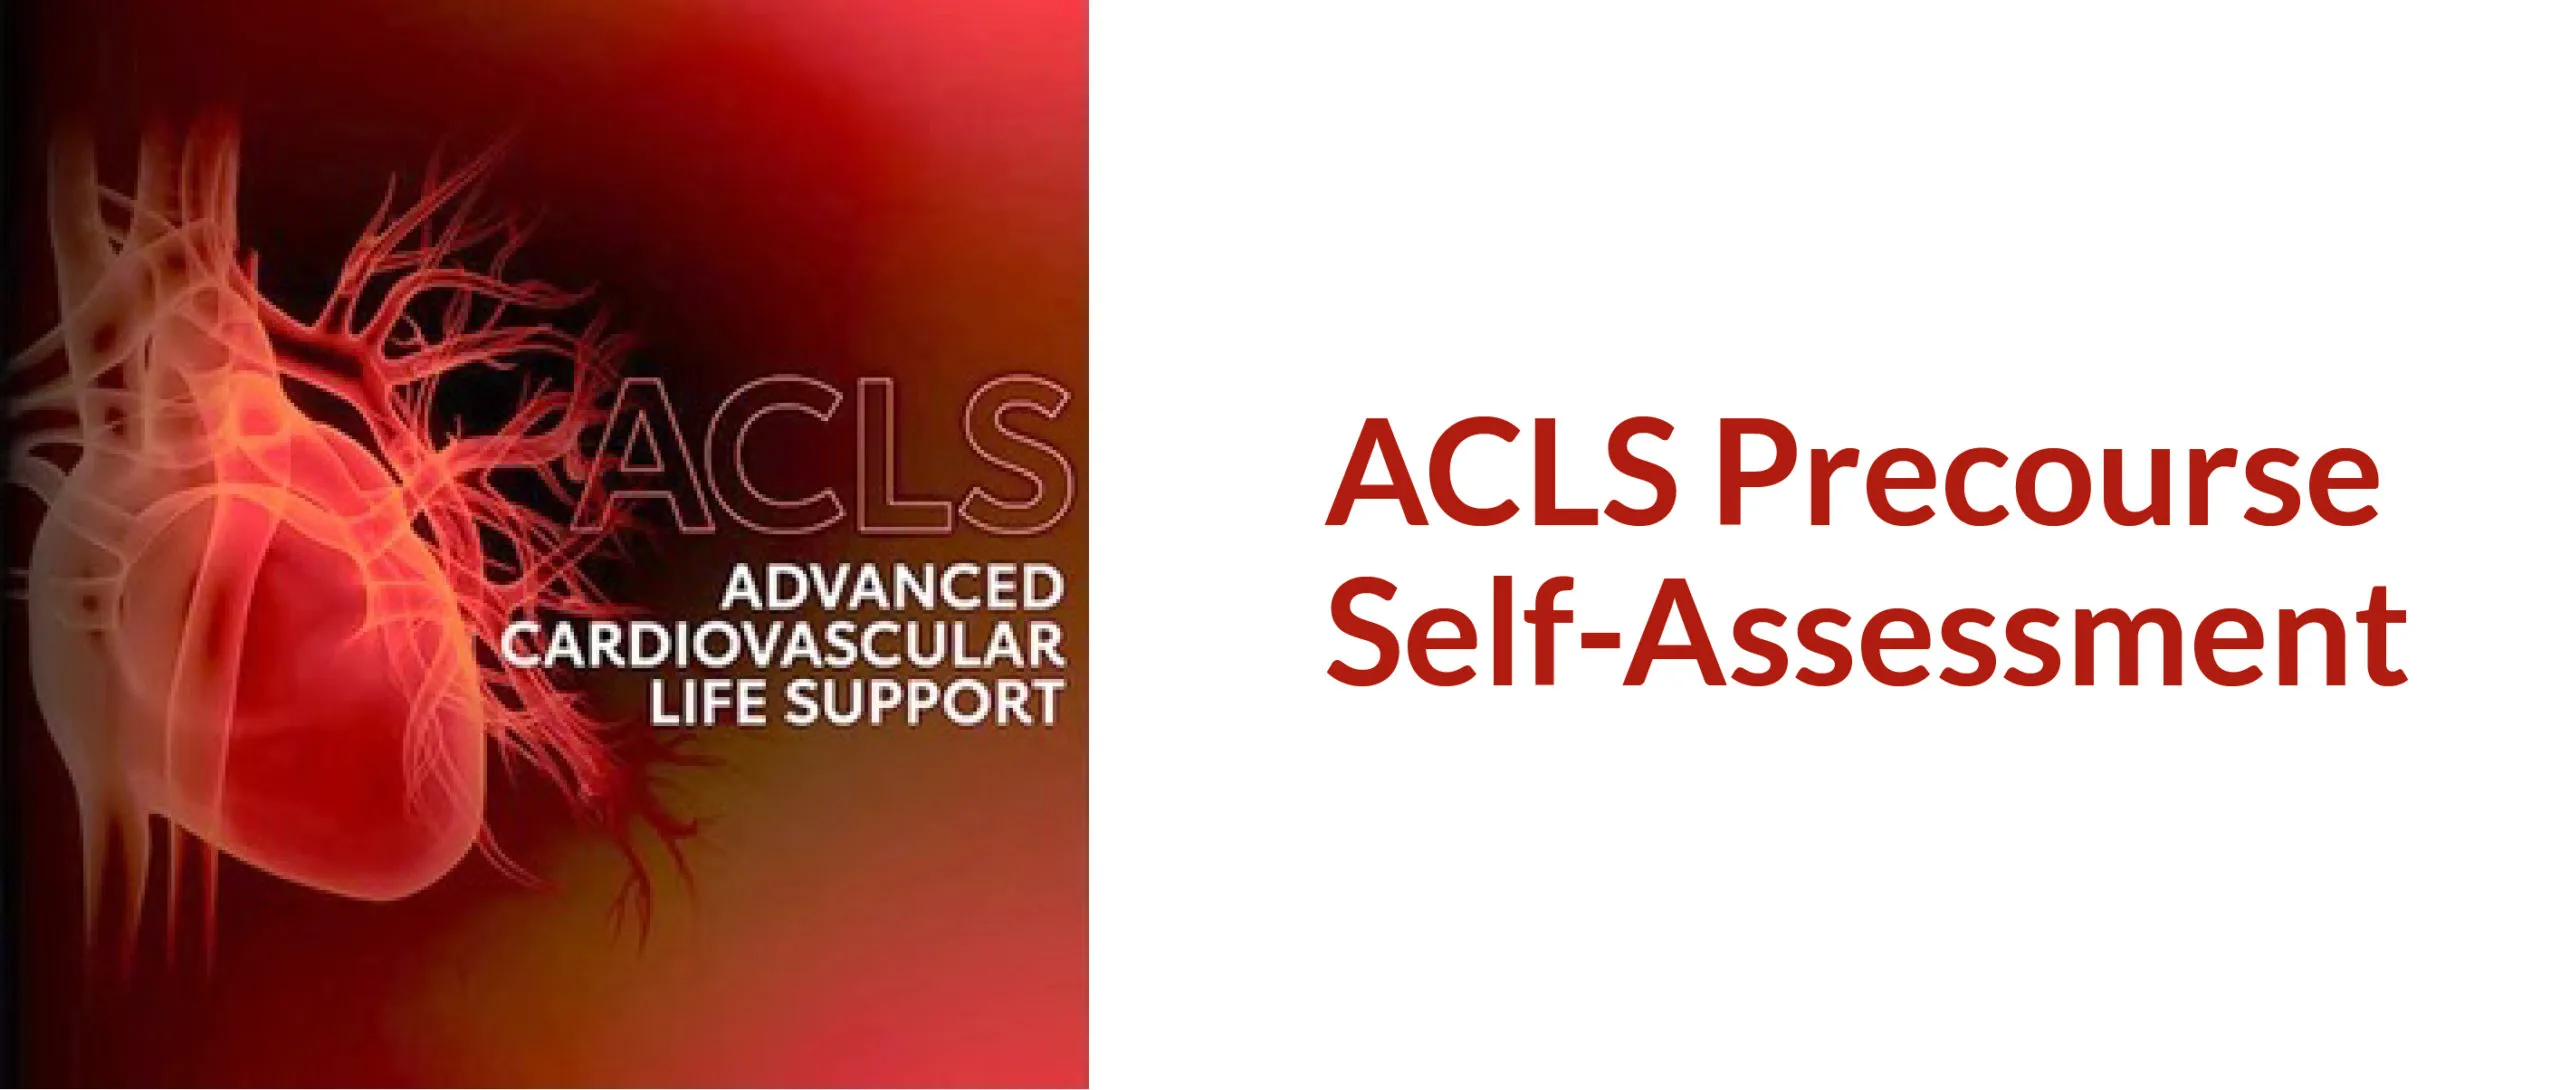 Advanced Cardiovascular Life Support Course | Elite CPR Pro